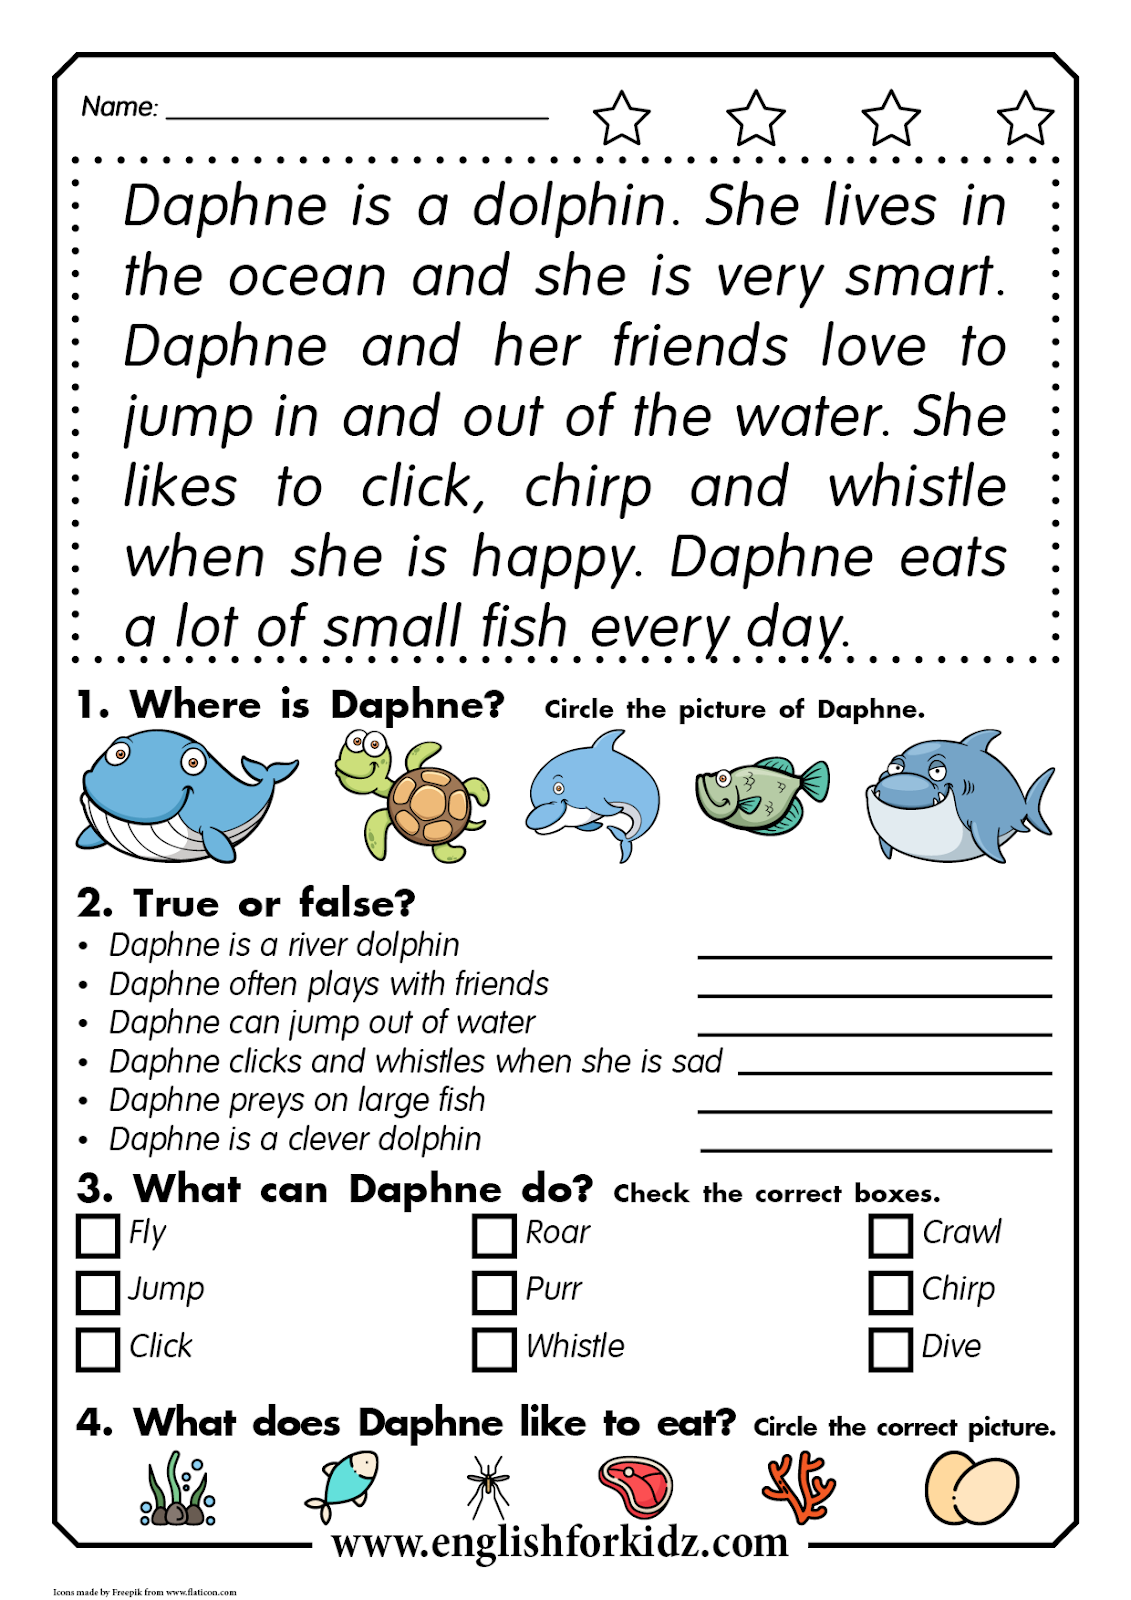 Reading Comprehension Worksheets Daphne The Dolphin